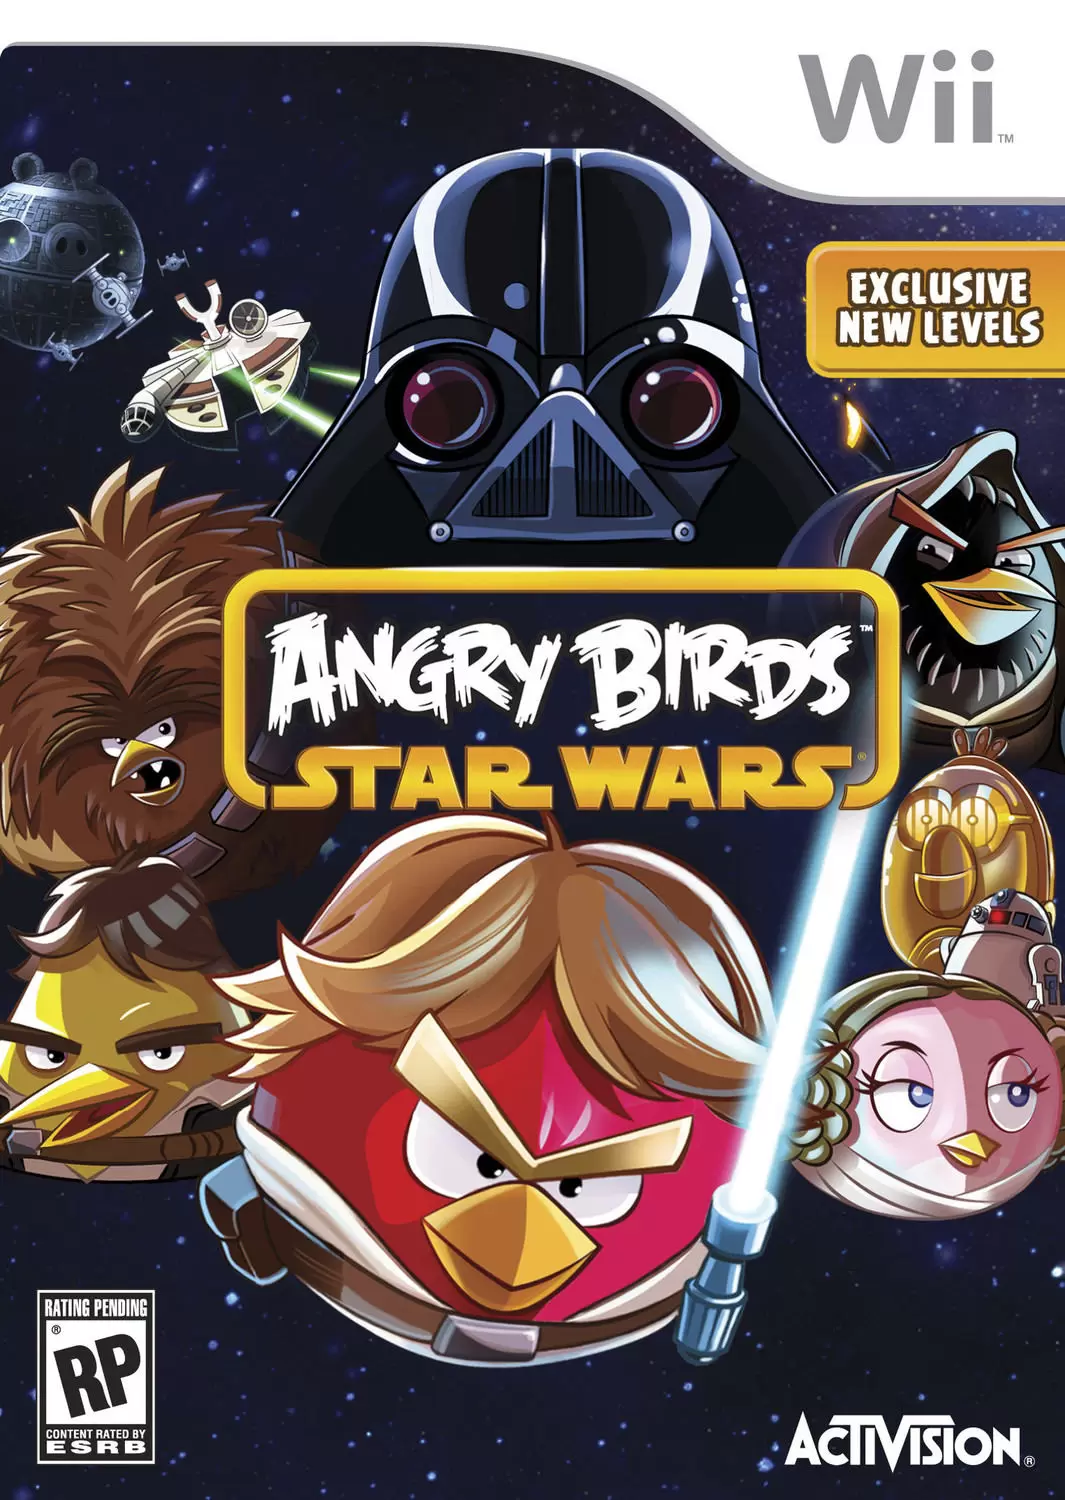 Nintendo Wii Games - Angry Birds Star Wars